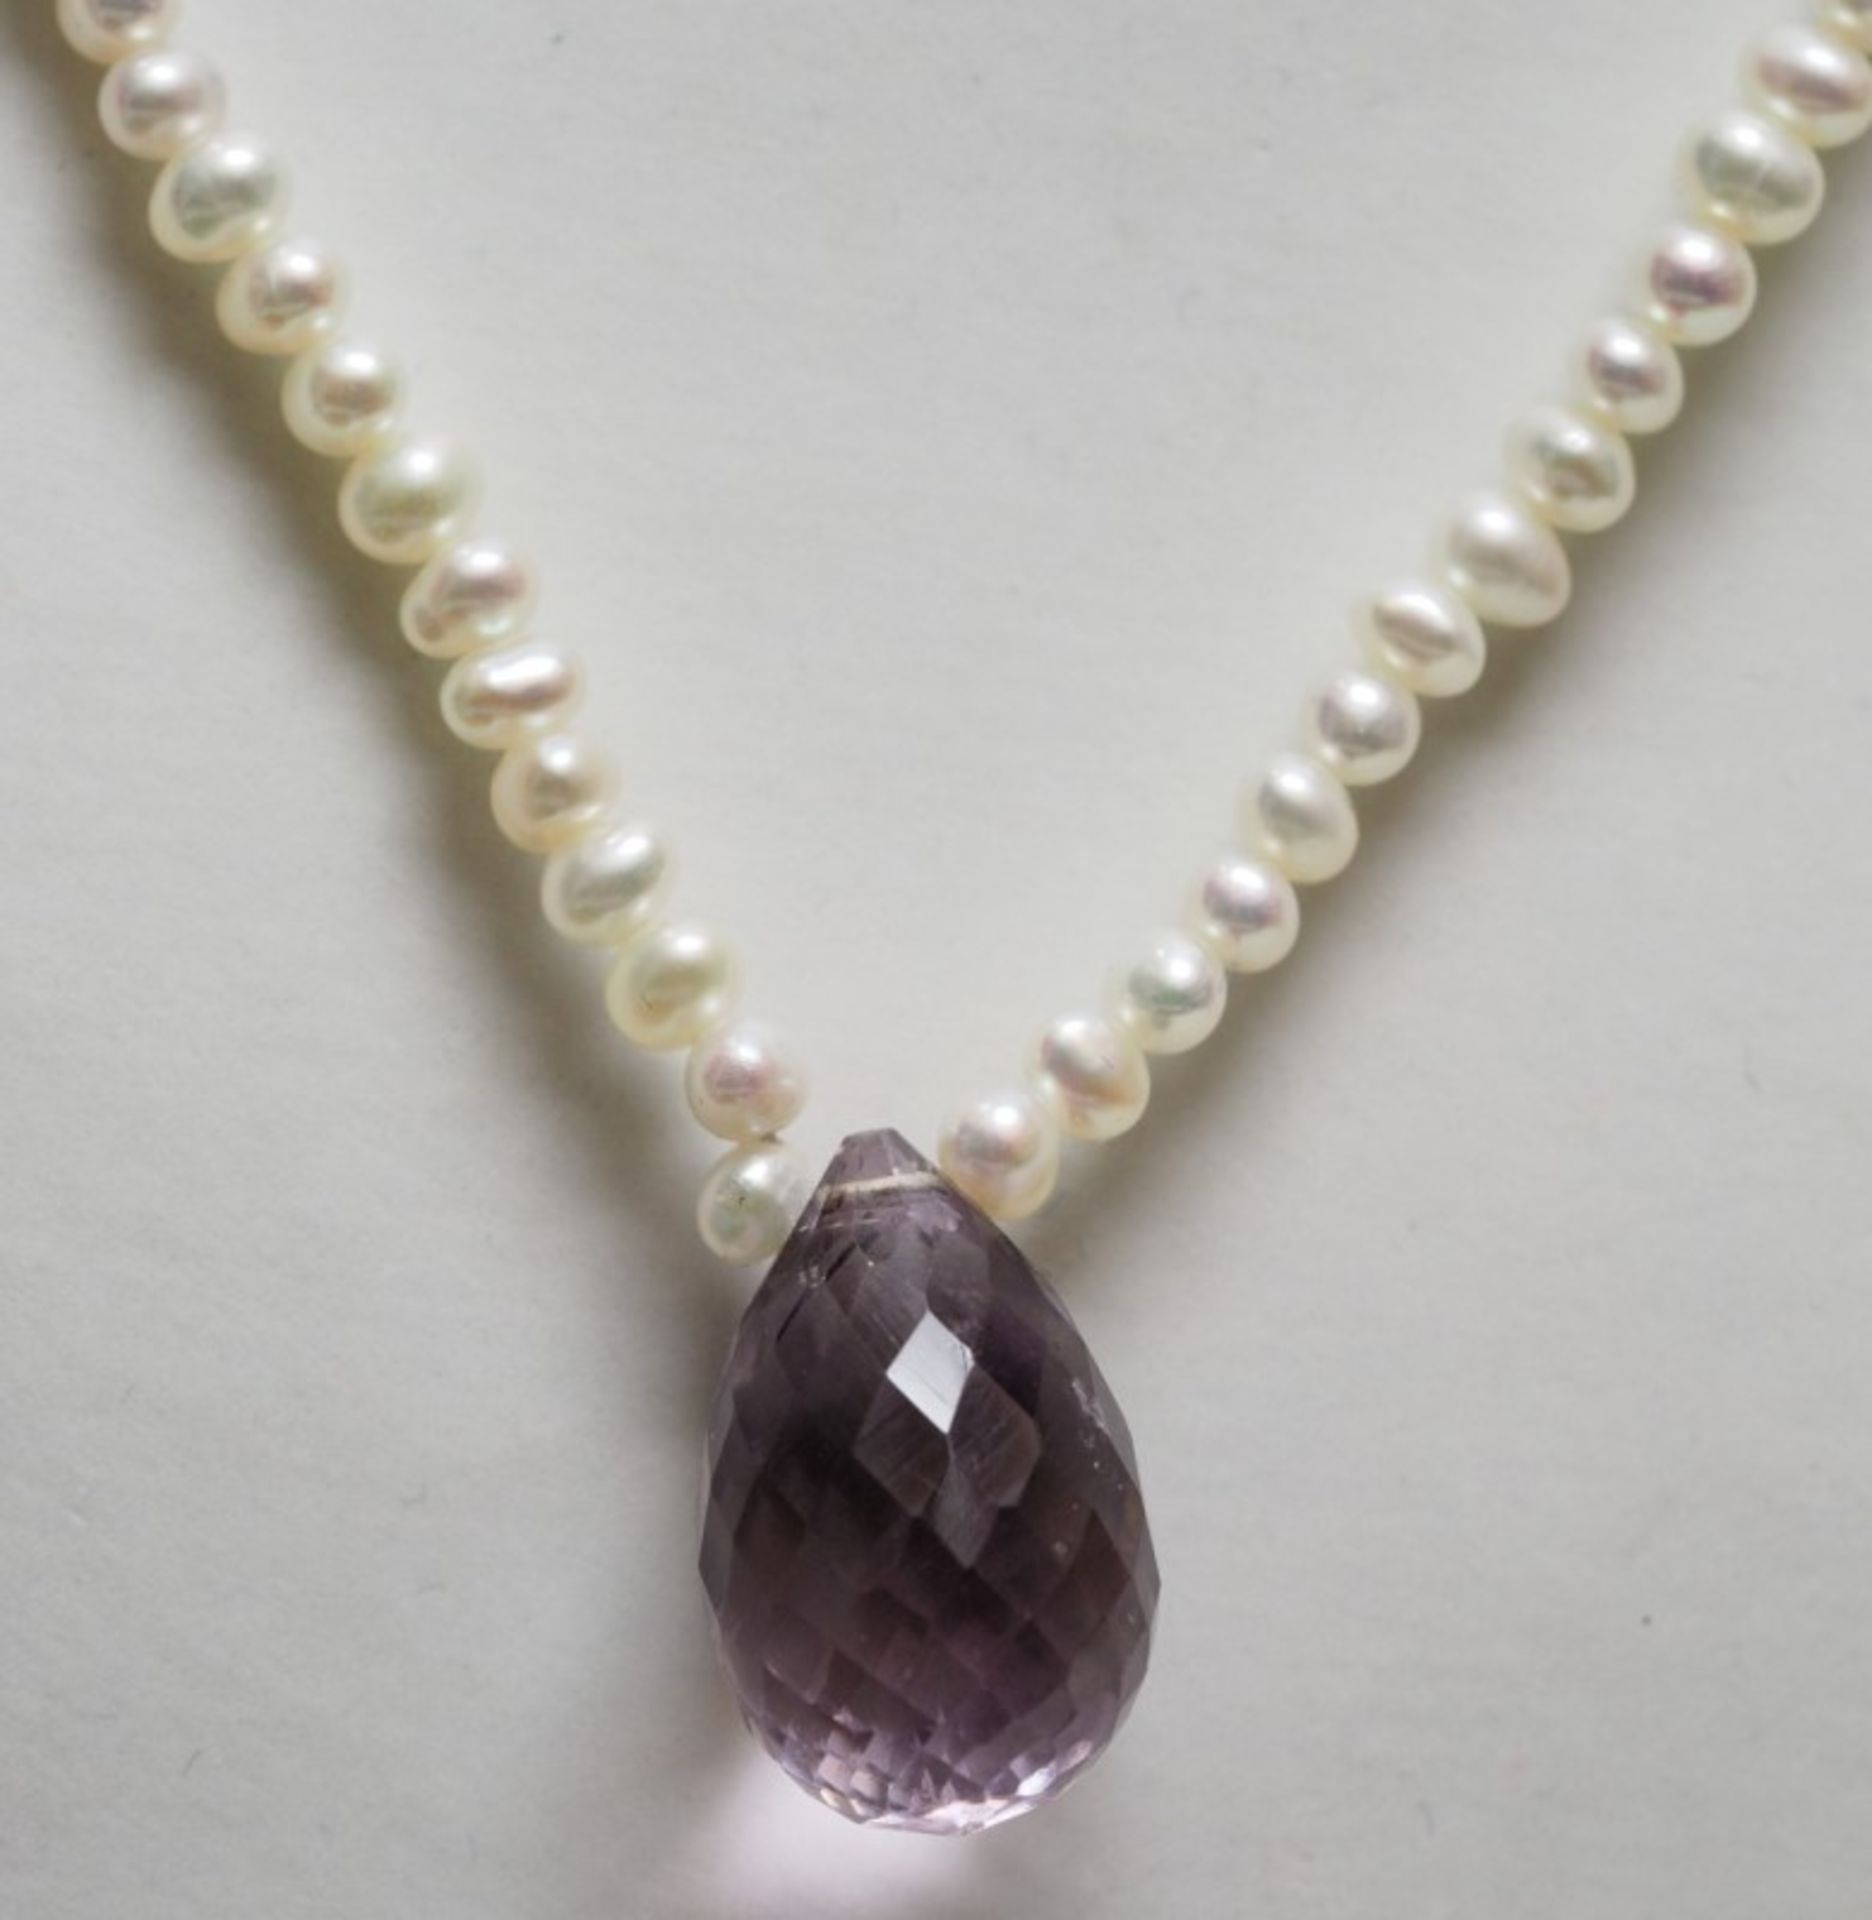 Magnetic Clasp Freshwater Pearl Neckalce Amethyst Drop (App 5ct) Retail $600 - Image 2 of 3